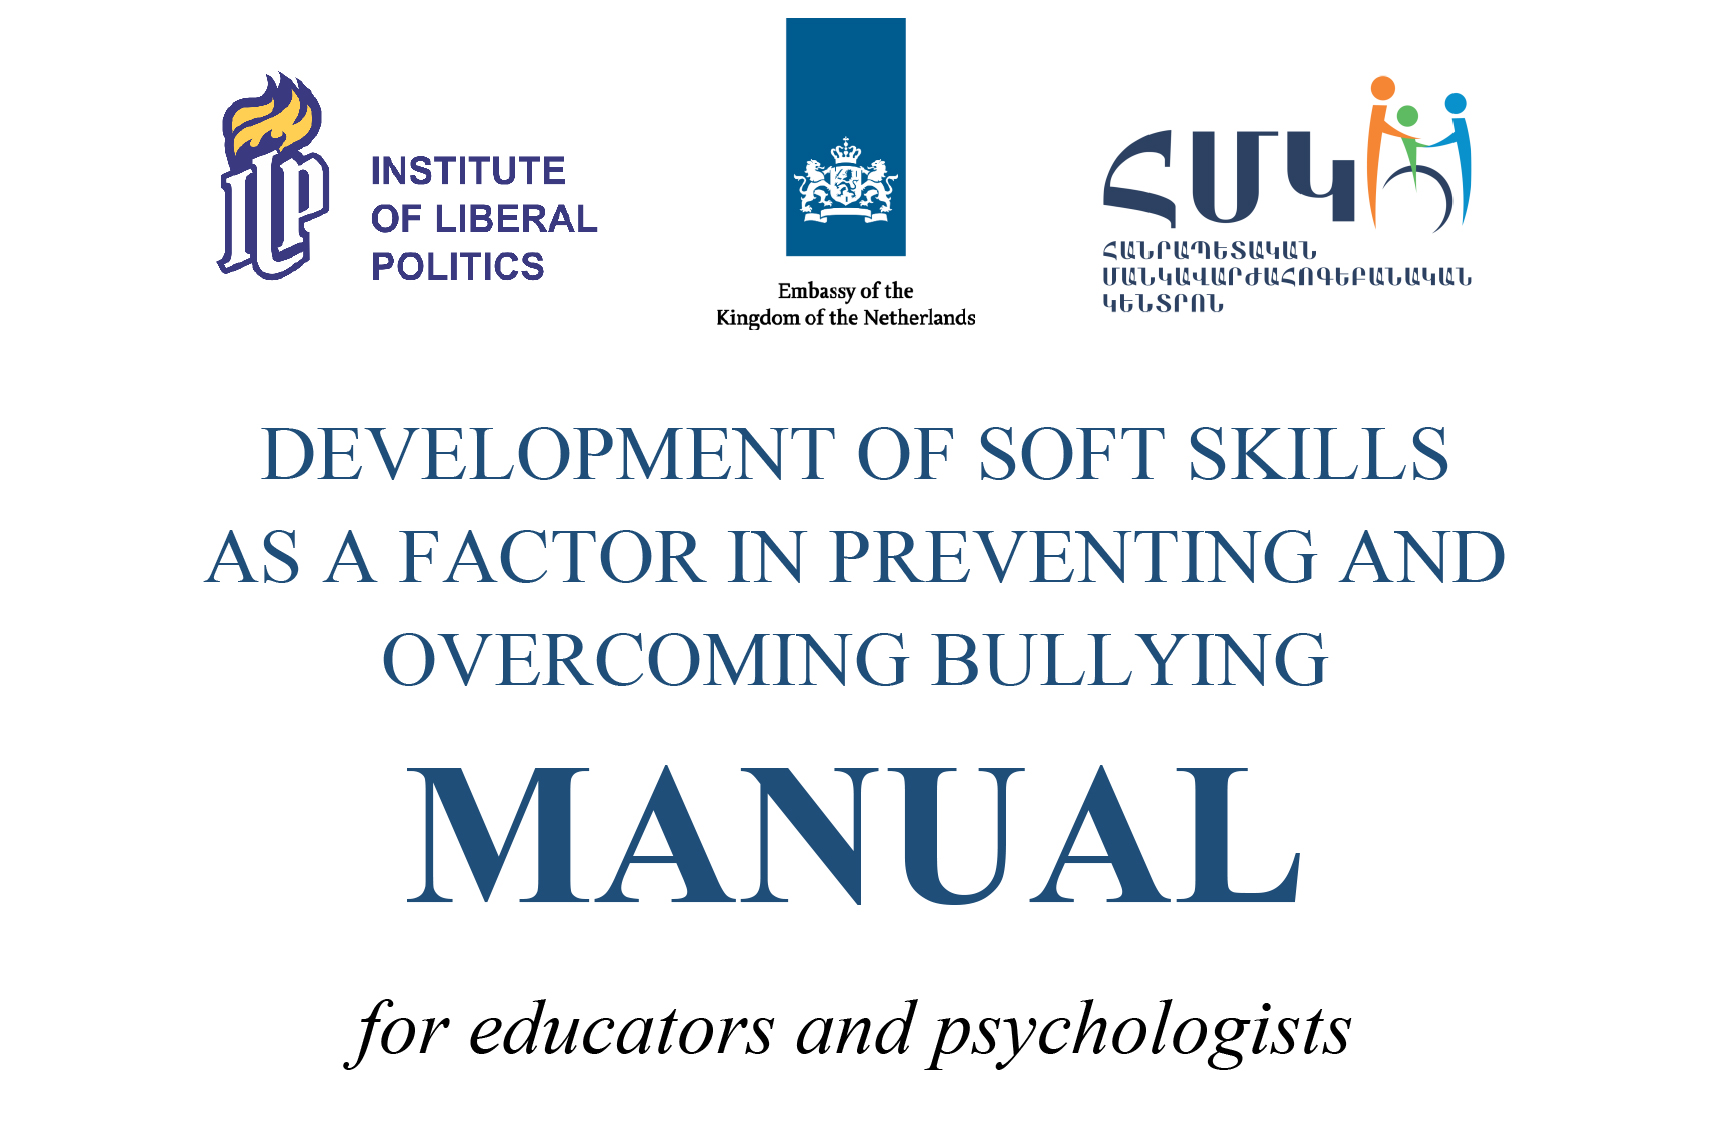 Development of soft skills as a factor for preventing and overcoming bullying